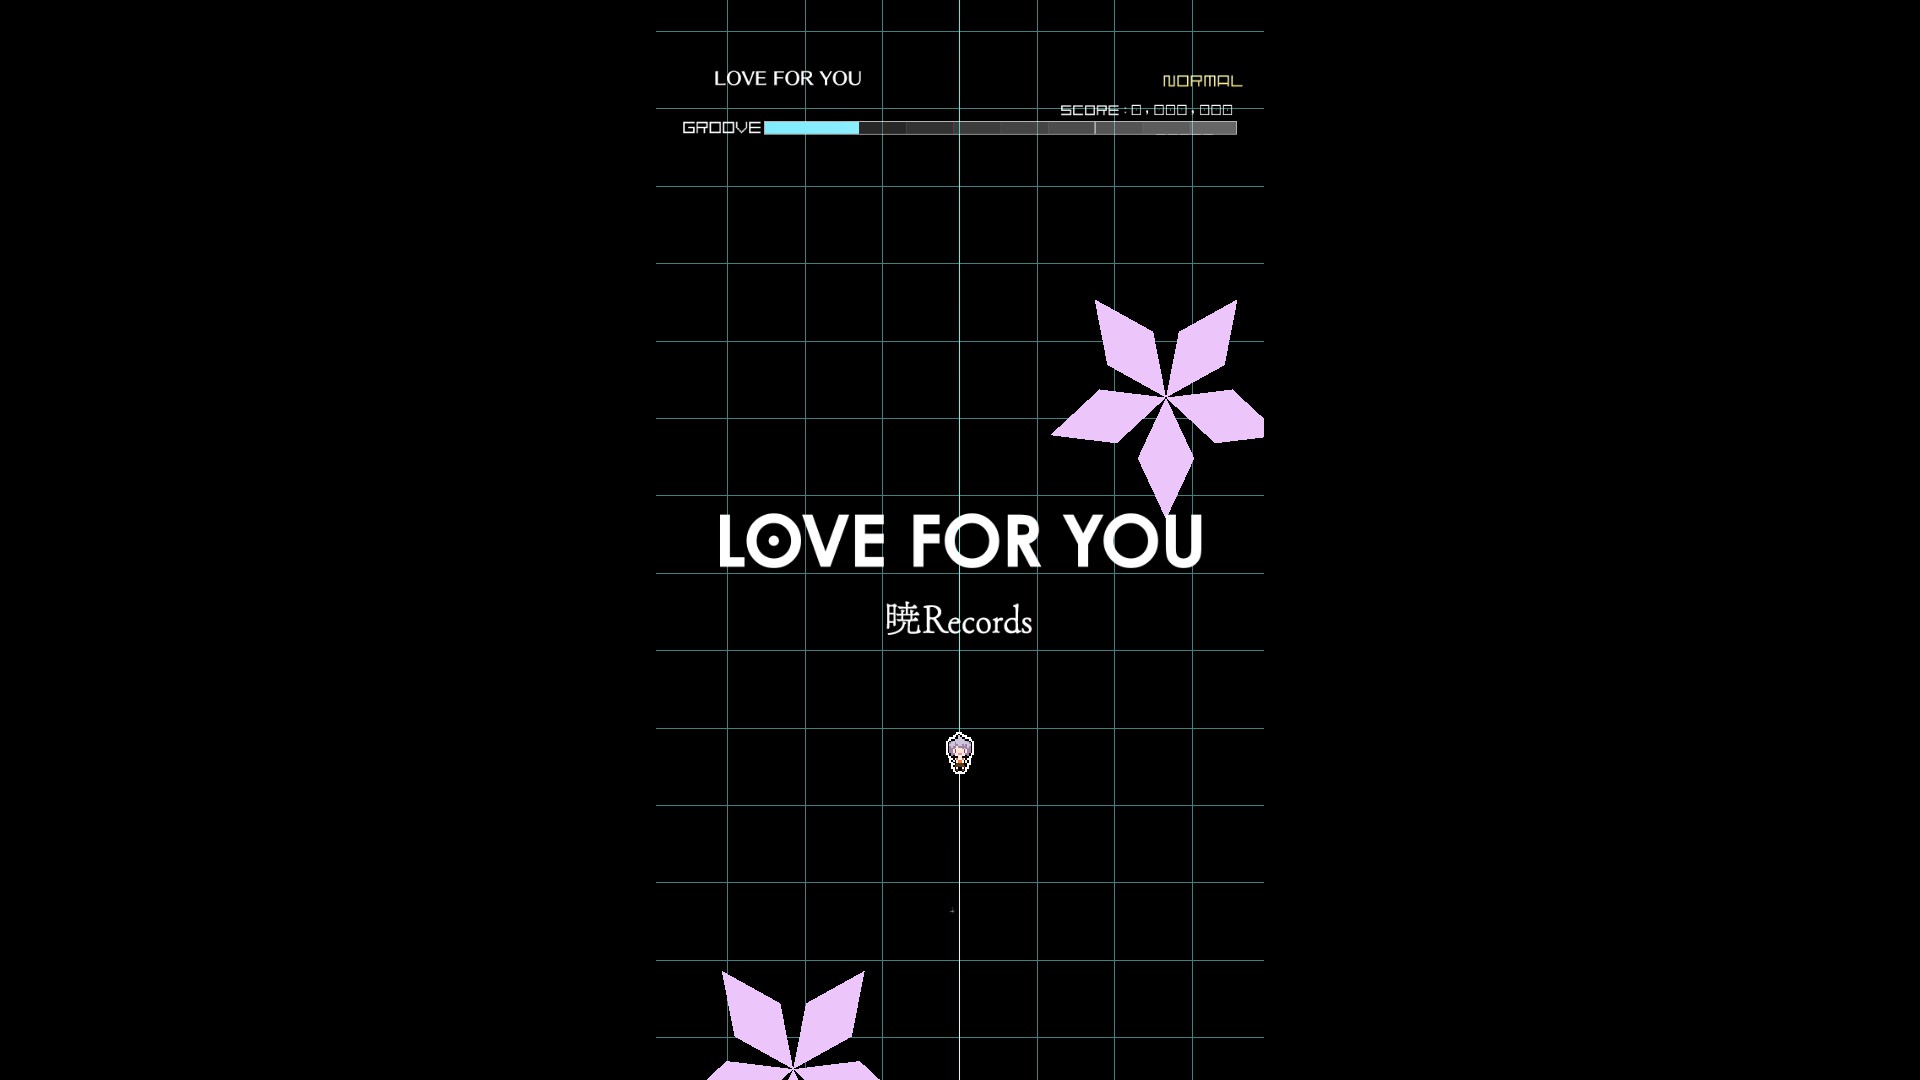 Groove Coaster - LOVE FOR YOU Featured Screenshot #1